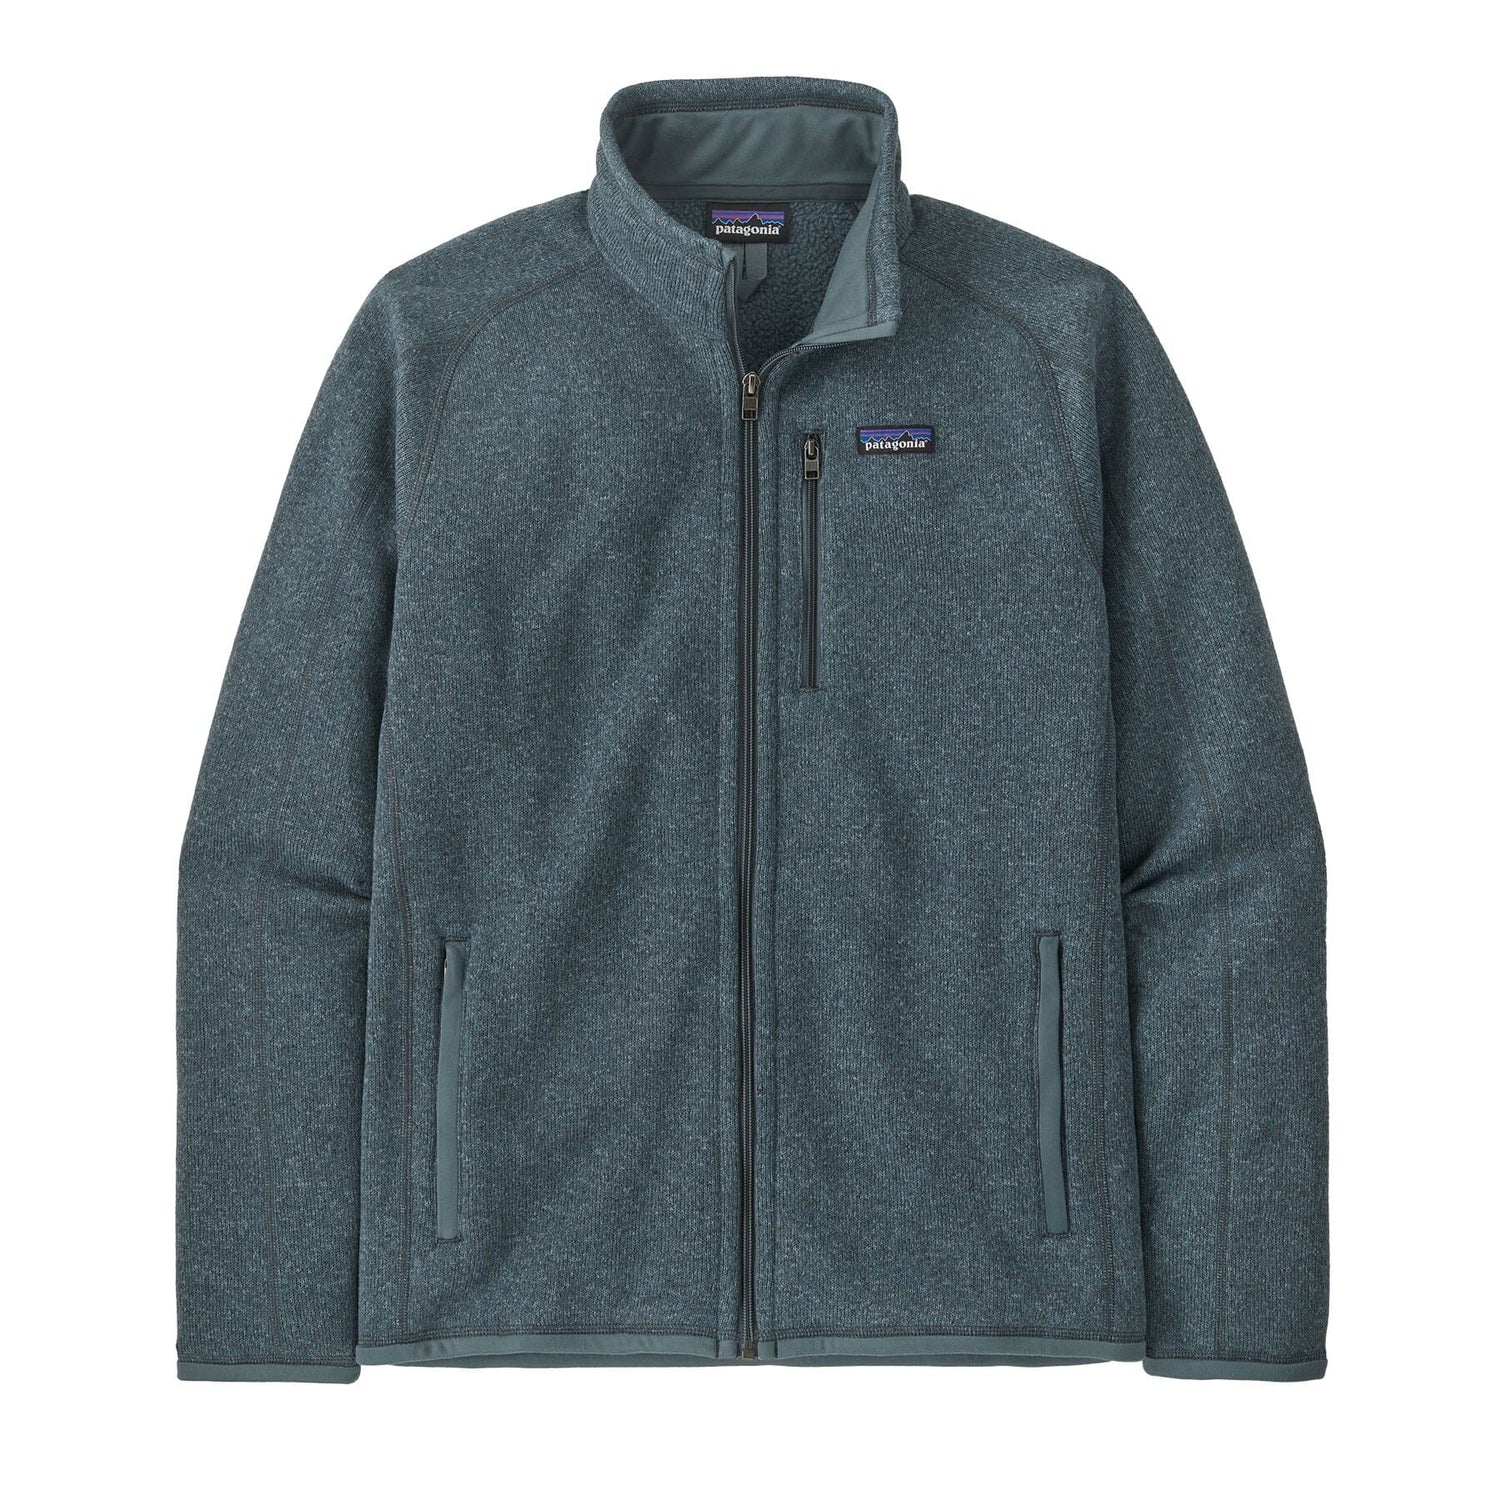 Patagonia M's Better Sweater Fleece Jacket - 100 % recycled polyester Nouveau Green Shirt